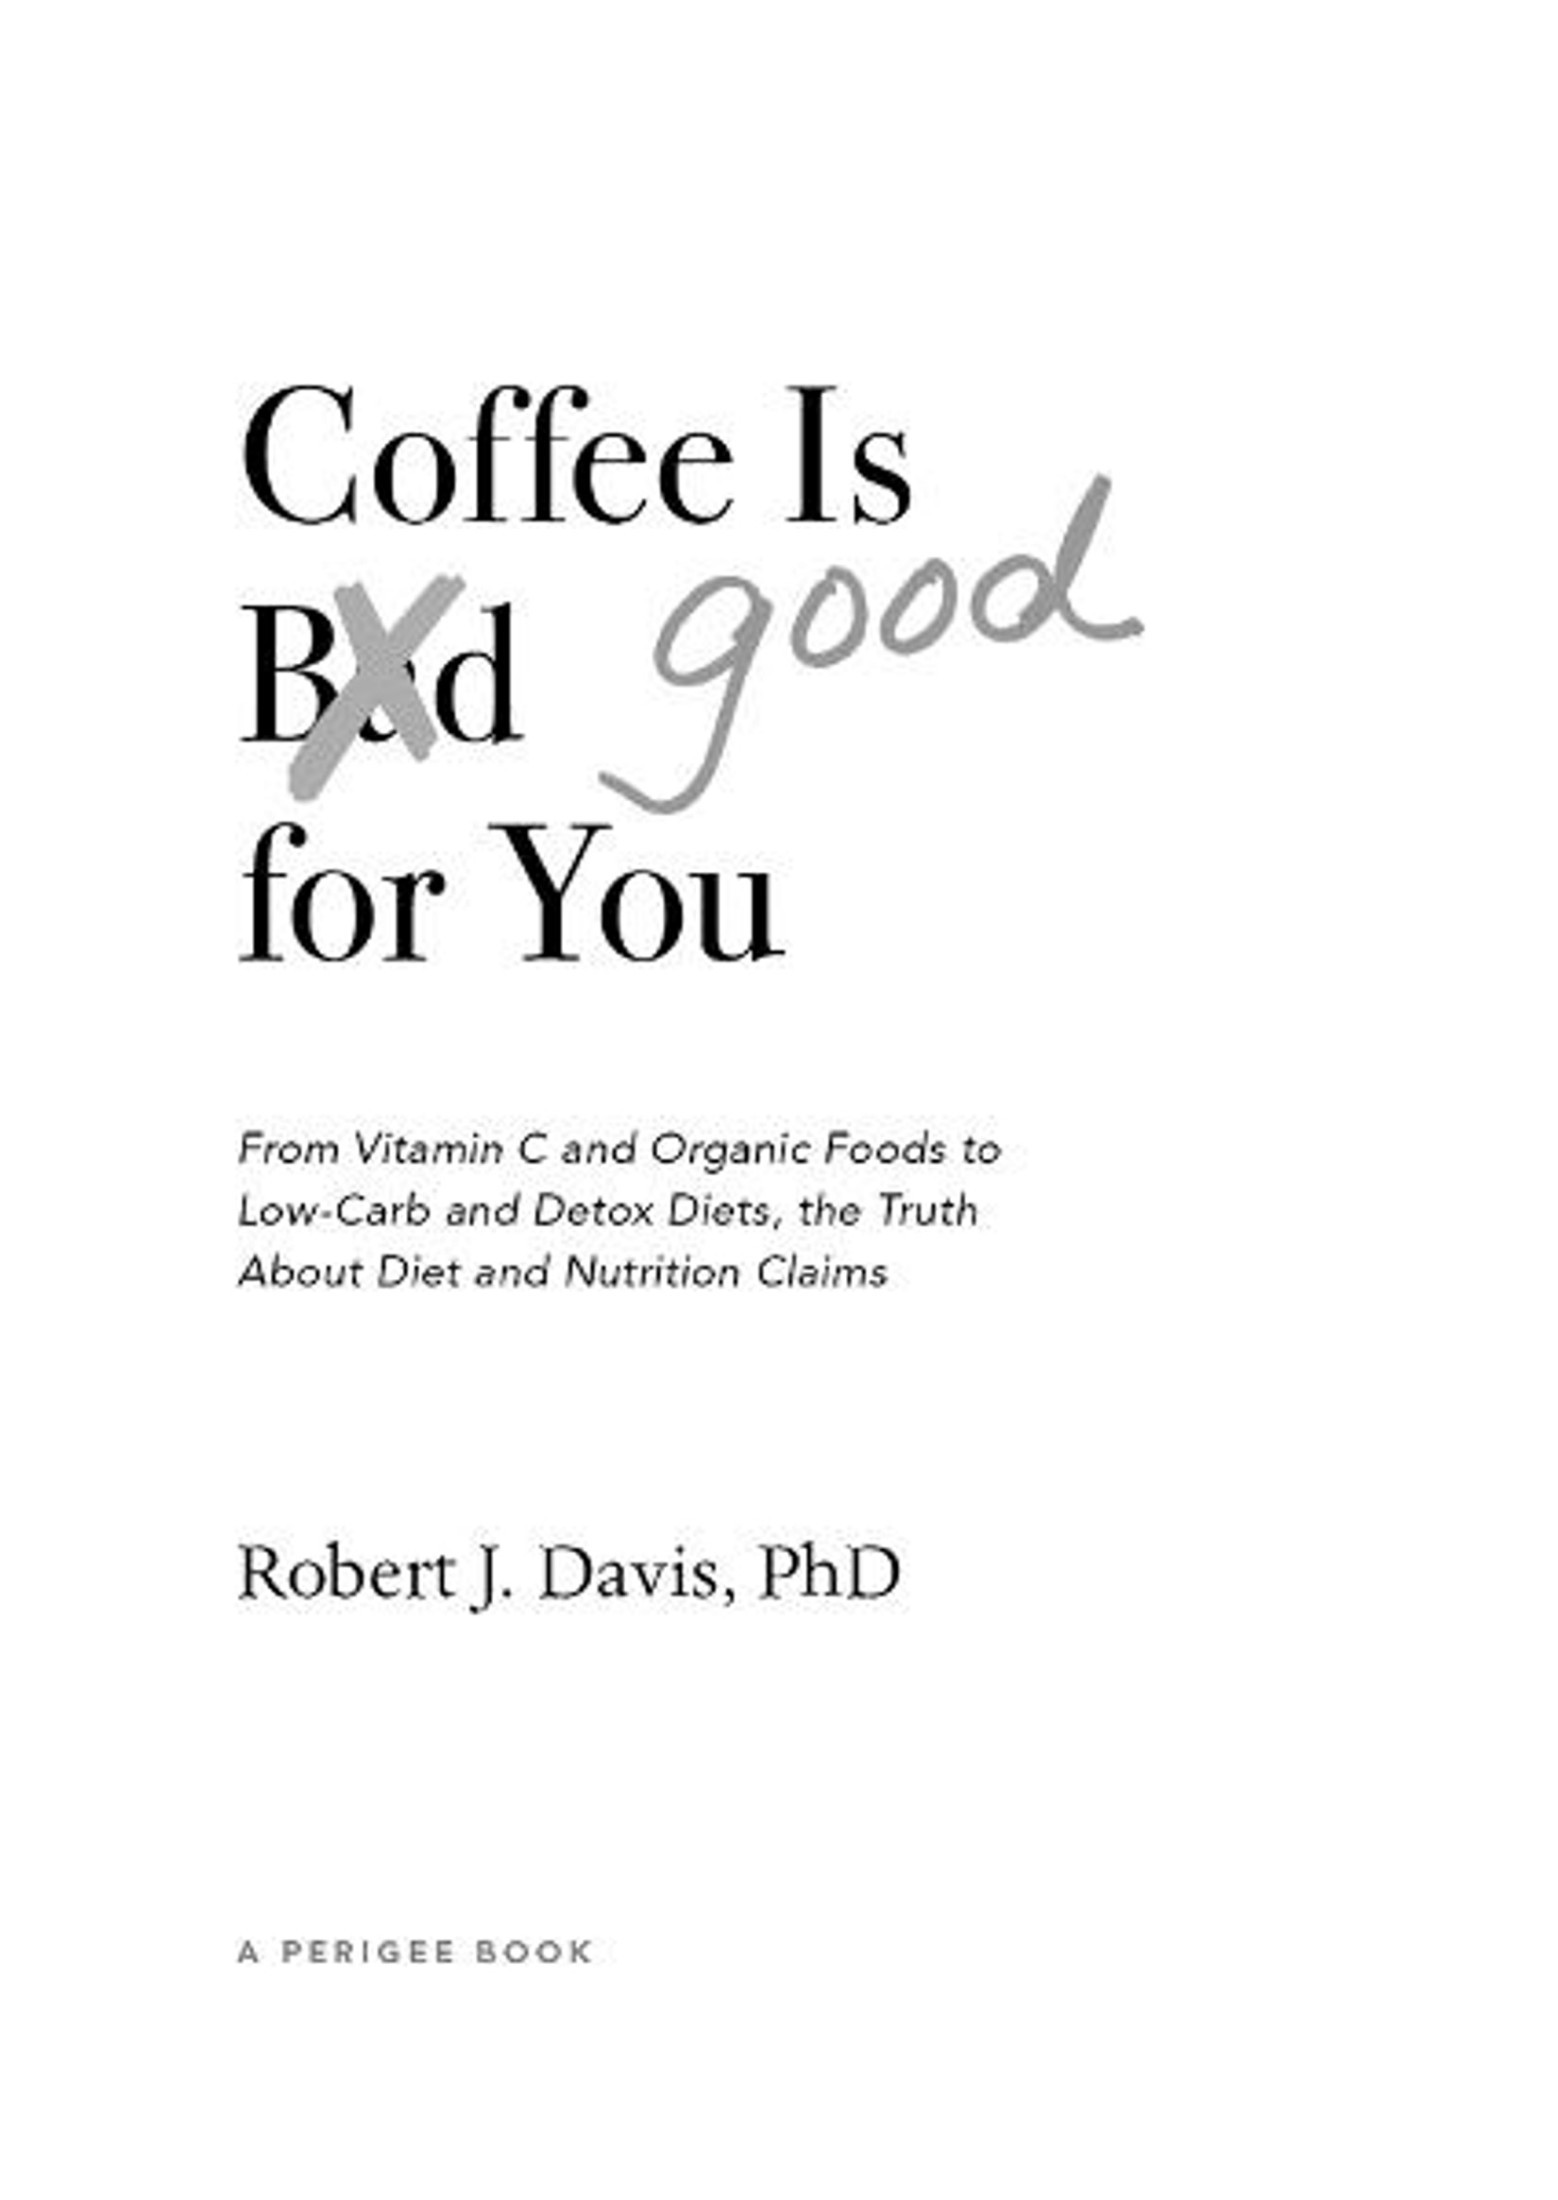 Coffee Is Good for You: From Vitamin C and Organic Foods to Low-Carb and Detox Diets, the Truth About Di Et and Nutrition Claims